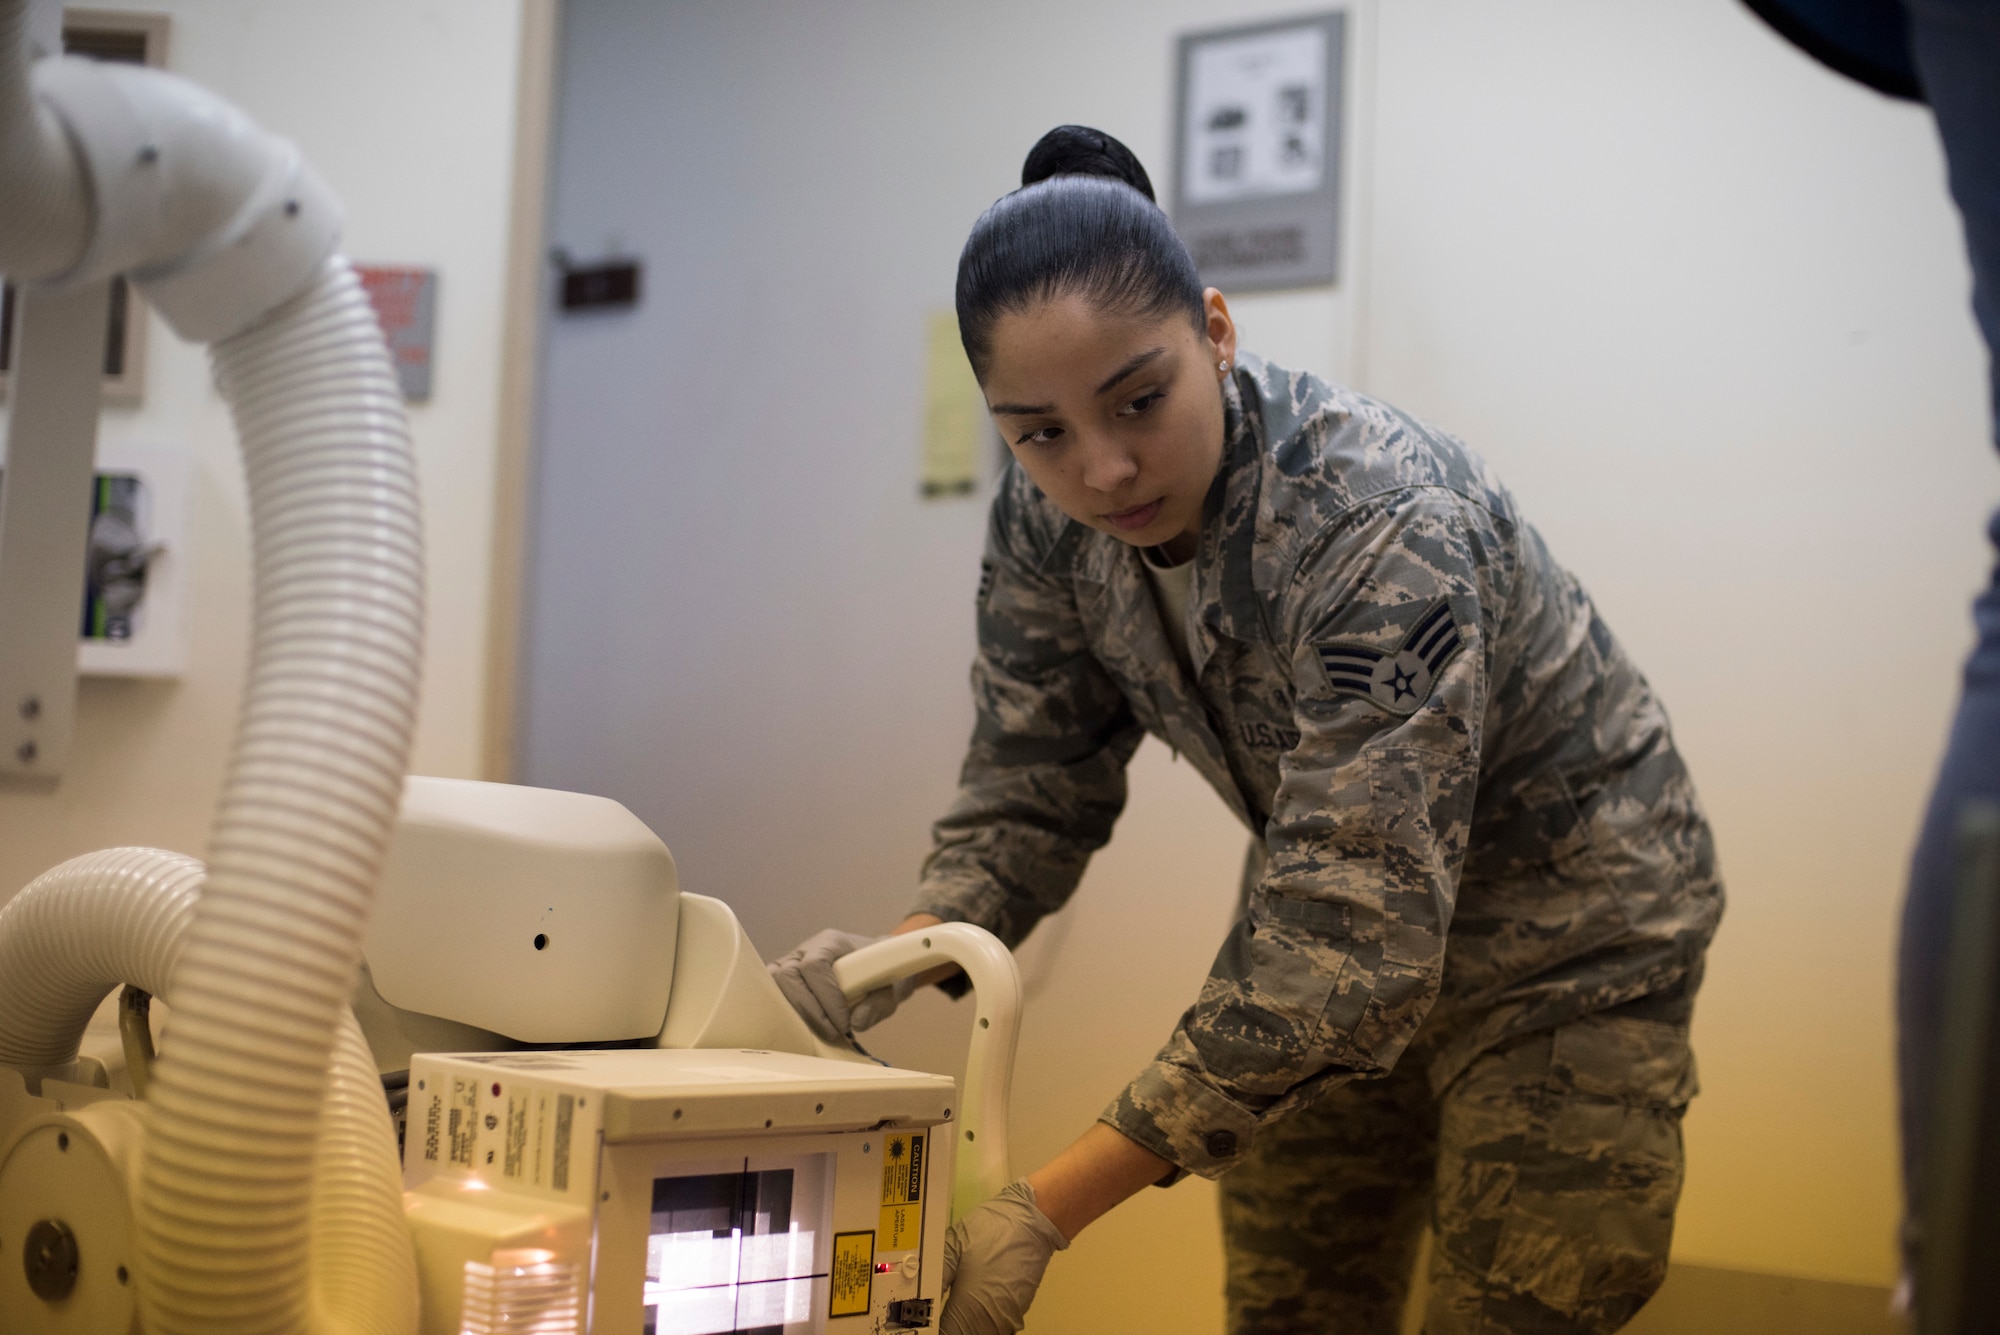 U.S. Air Force Senior Airman Darae Aguilar, a 35th Surgical Operations Squadron diagnostic imaging technician, positions an x-ray tube to take an image of a patient’s foot at Misawa Air Base, Japan, April 10, 2019. An x-ray tube is a vacuum tube that converts electrical input power into x-rays creating pictures and images of a human body’s insides. (U.S. Air Force photo by Senior Airman Collette Brooks)